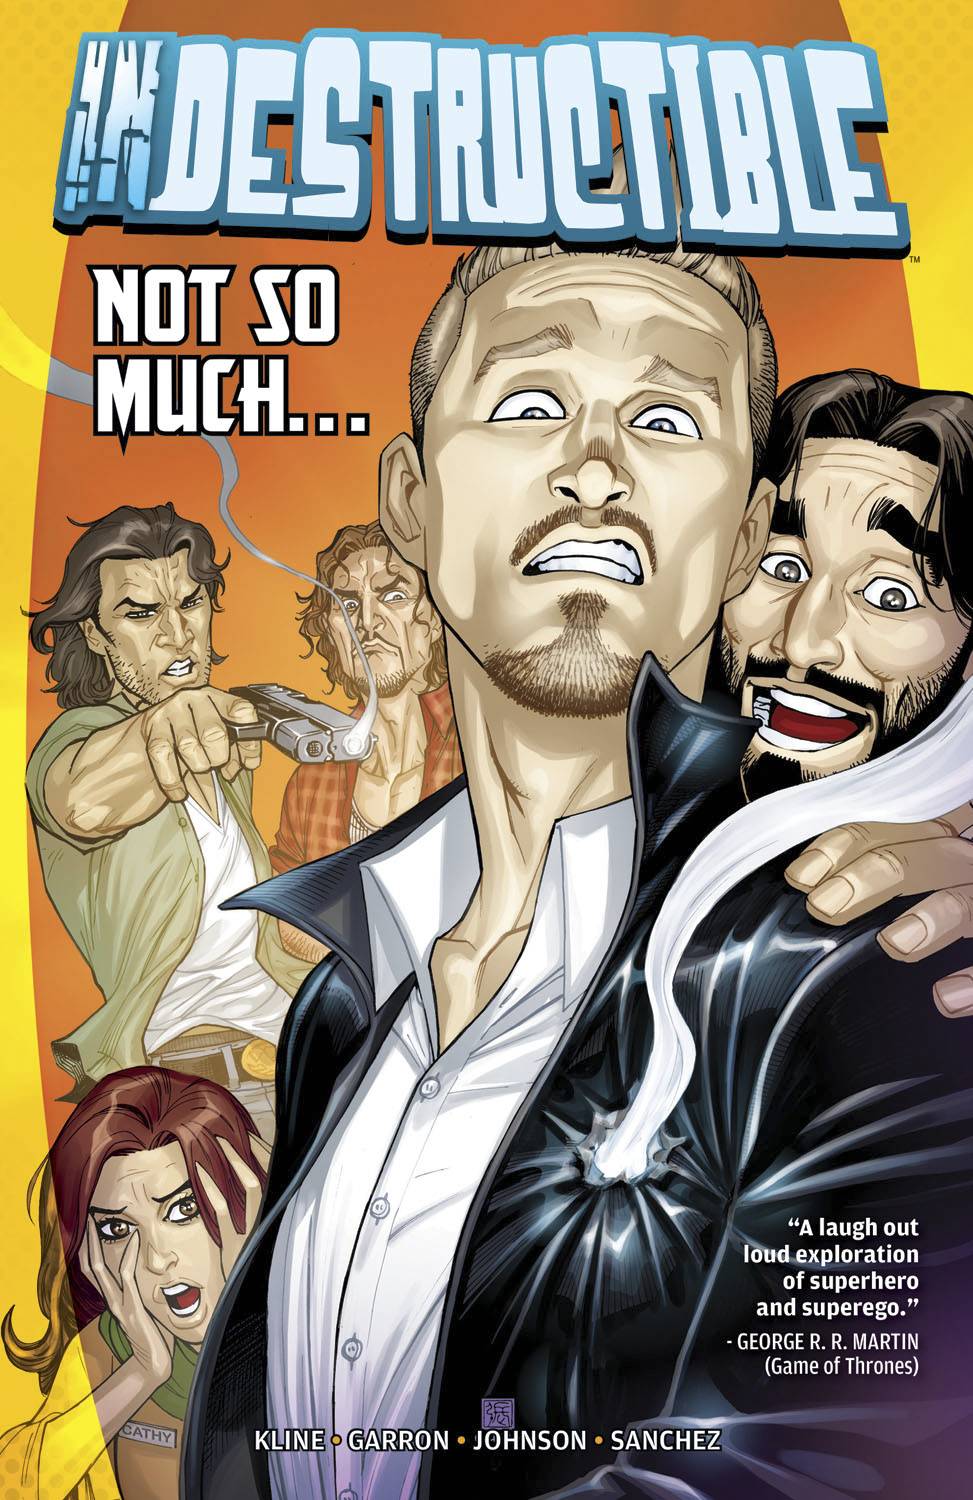 Indestructible Graphic Novel Volume 1 Not So Much